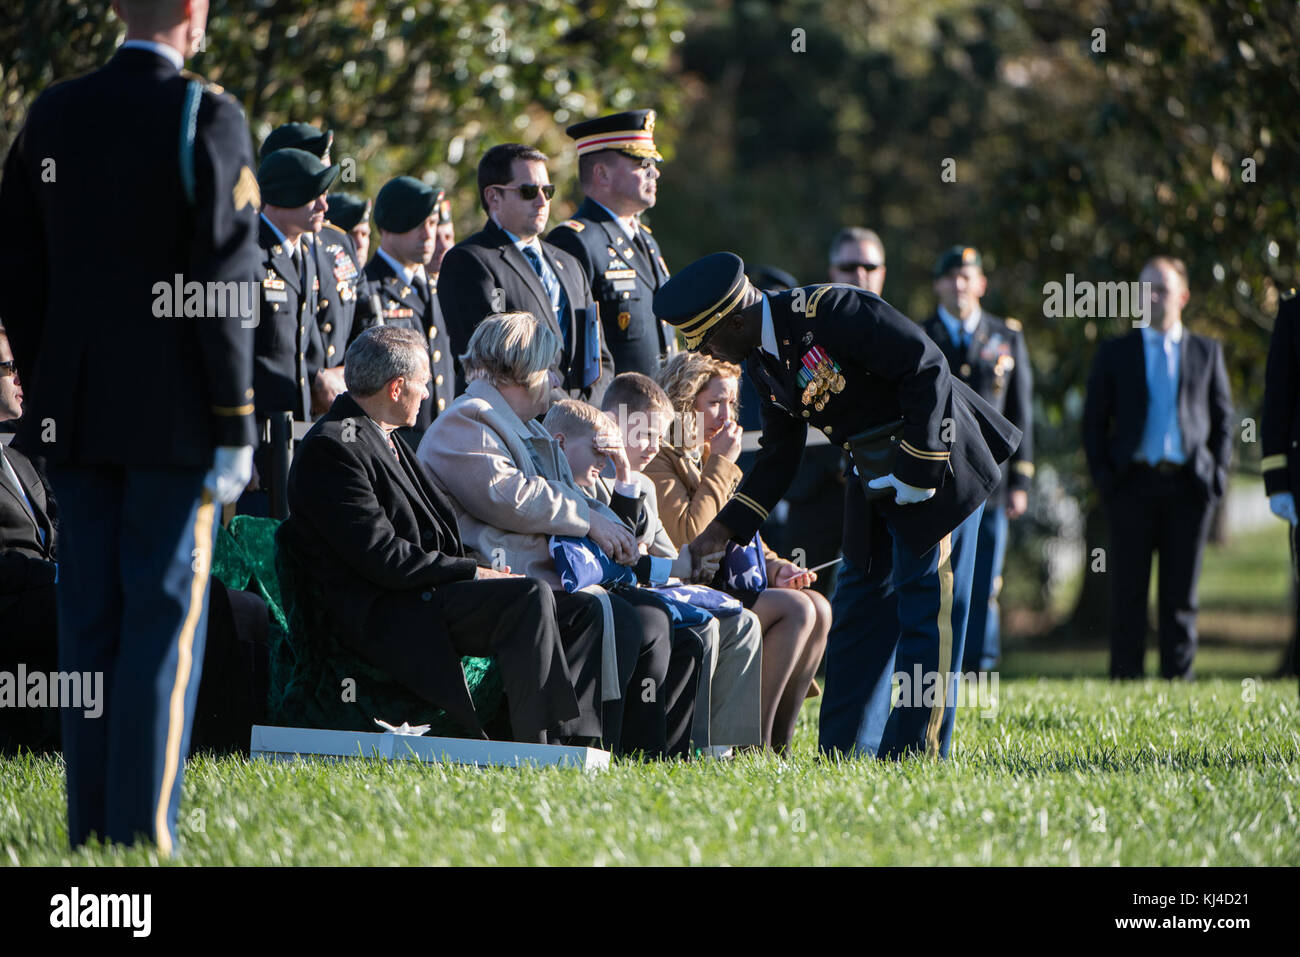 Graveside Service of U.S. Army Staff Sgt. Bryan Black in Section 60 of Arlington National Cemetery (37342205924) Stock Photo